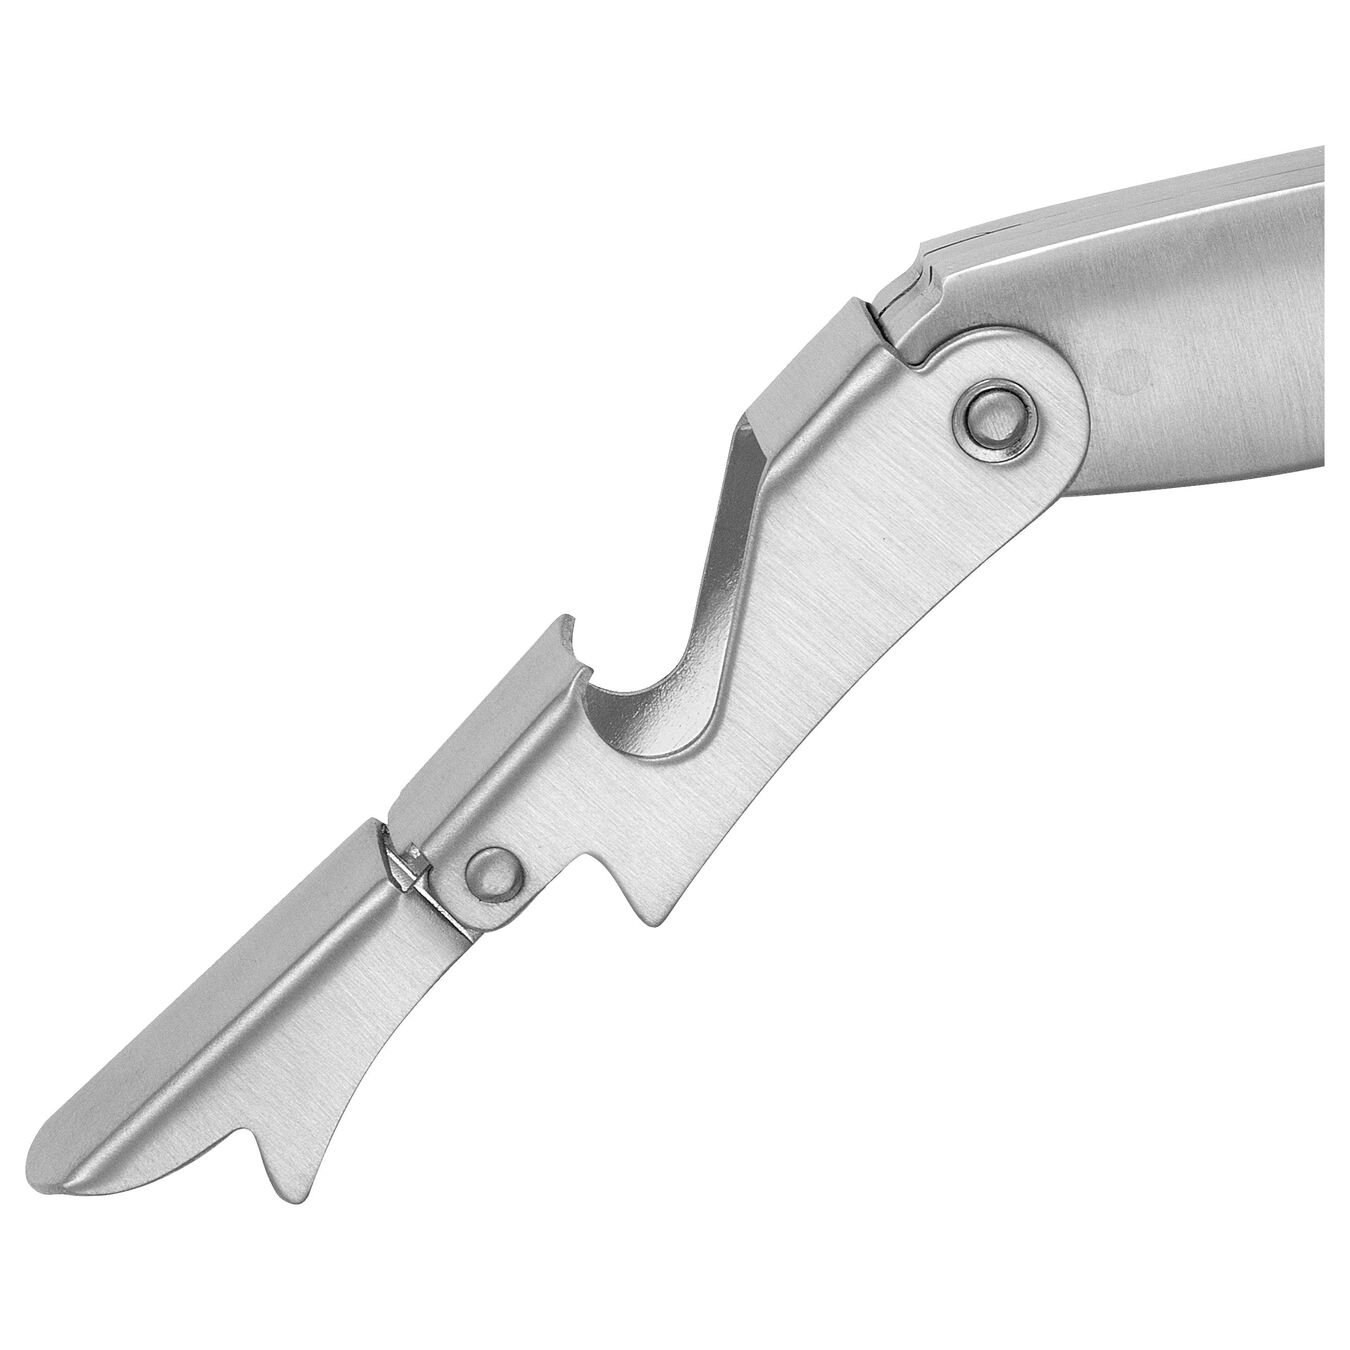 Skin Staple Remover Market Statistics and Growth Trends Analysis Forecast 2017 – 2032